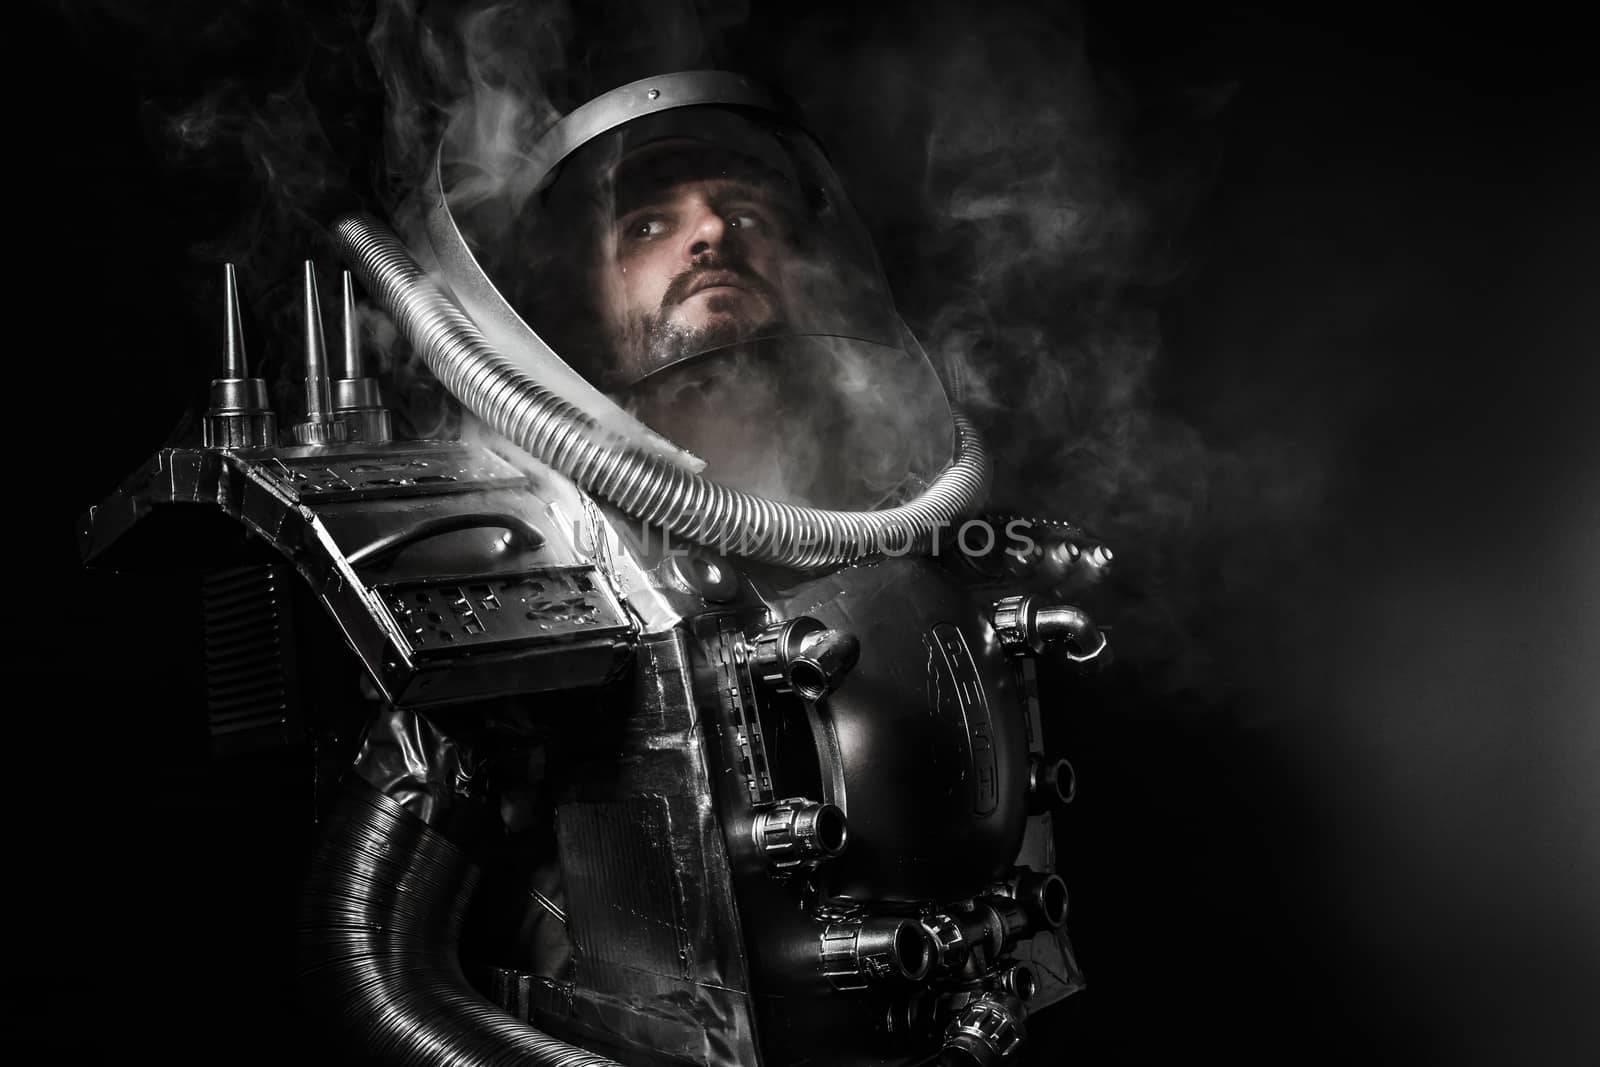 Astronaut, fantasy warrior with huge space weapon